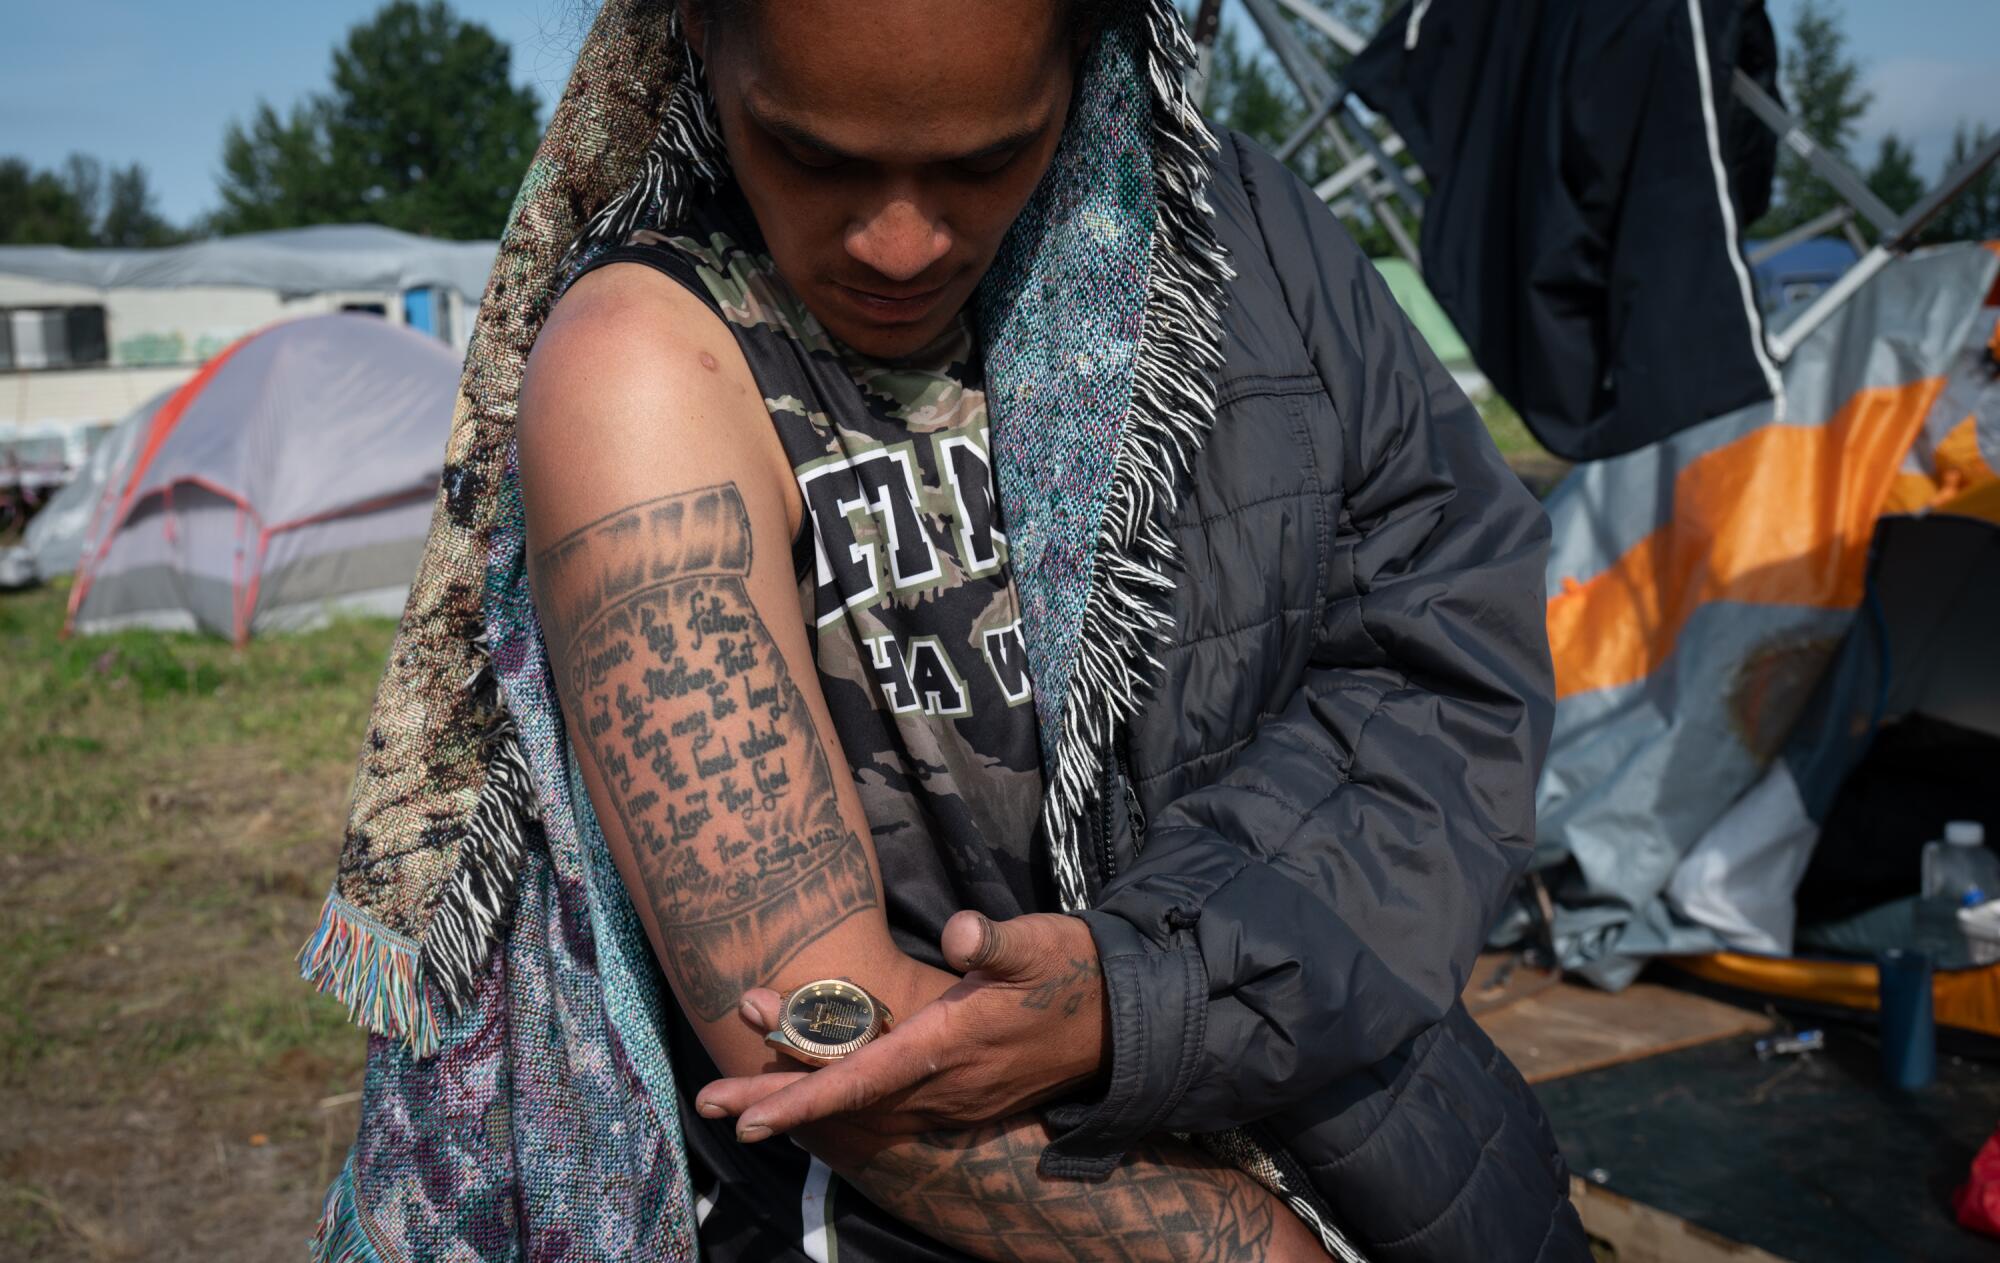 A woman shows a tattoo on her arm.